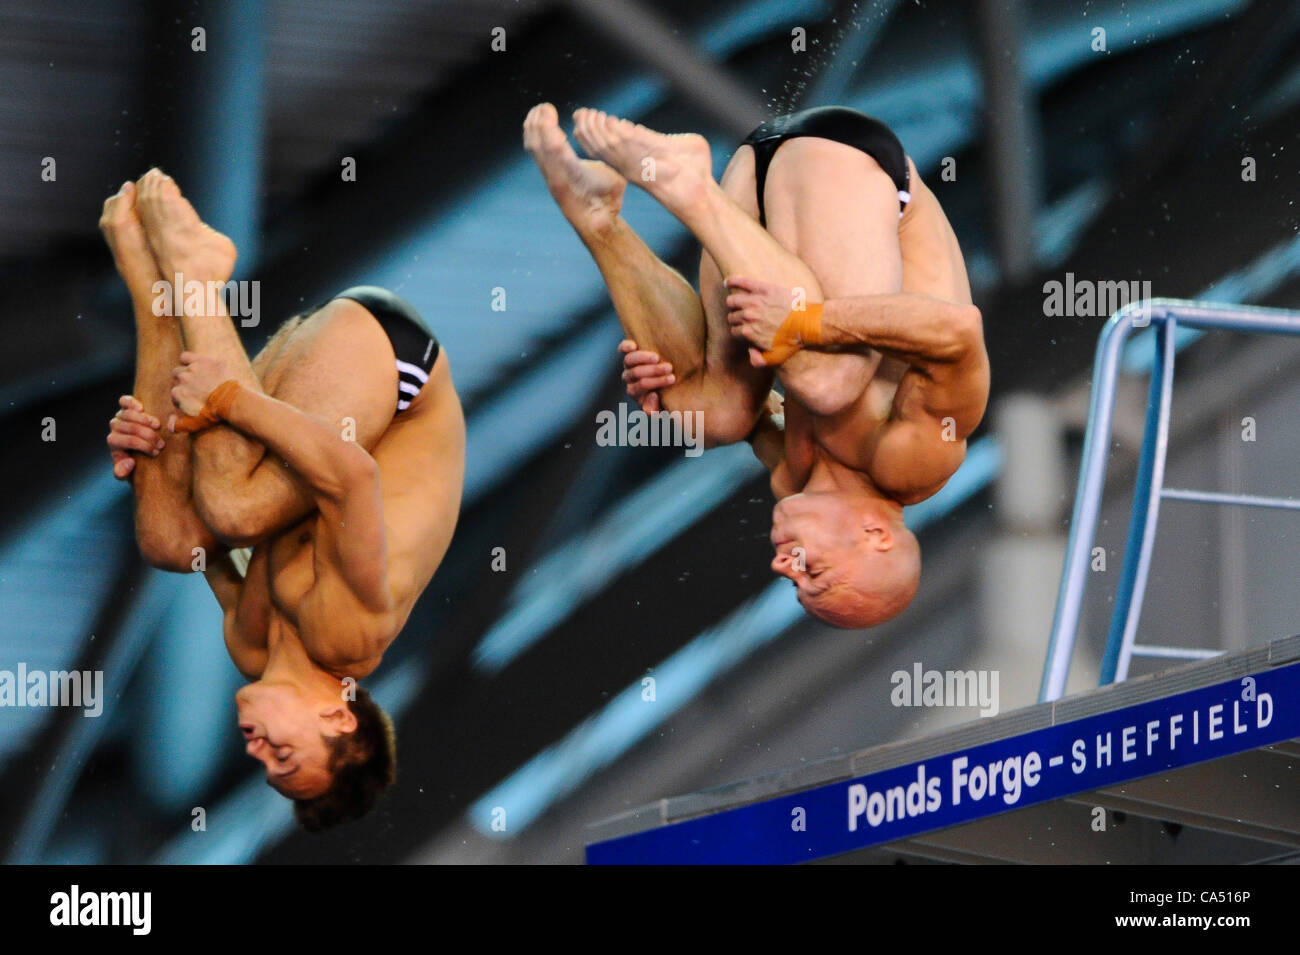 08.06.2012 Sheffield, England. Thomas Daley and Peter Waterfield (Plymouth Diving and Southampton DA) compete in the Mens 10m Synchro Platform Final going on to take victory and the Gold Medal on Day 1 of the 2012 British Gas Diving Championships (and Team GB Olympic Squad Selection Trials) at Ponds Stock Photo